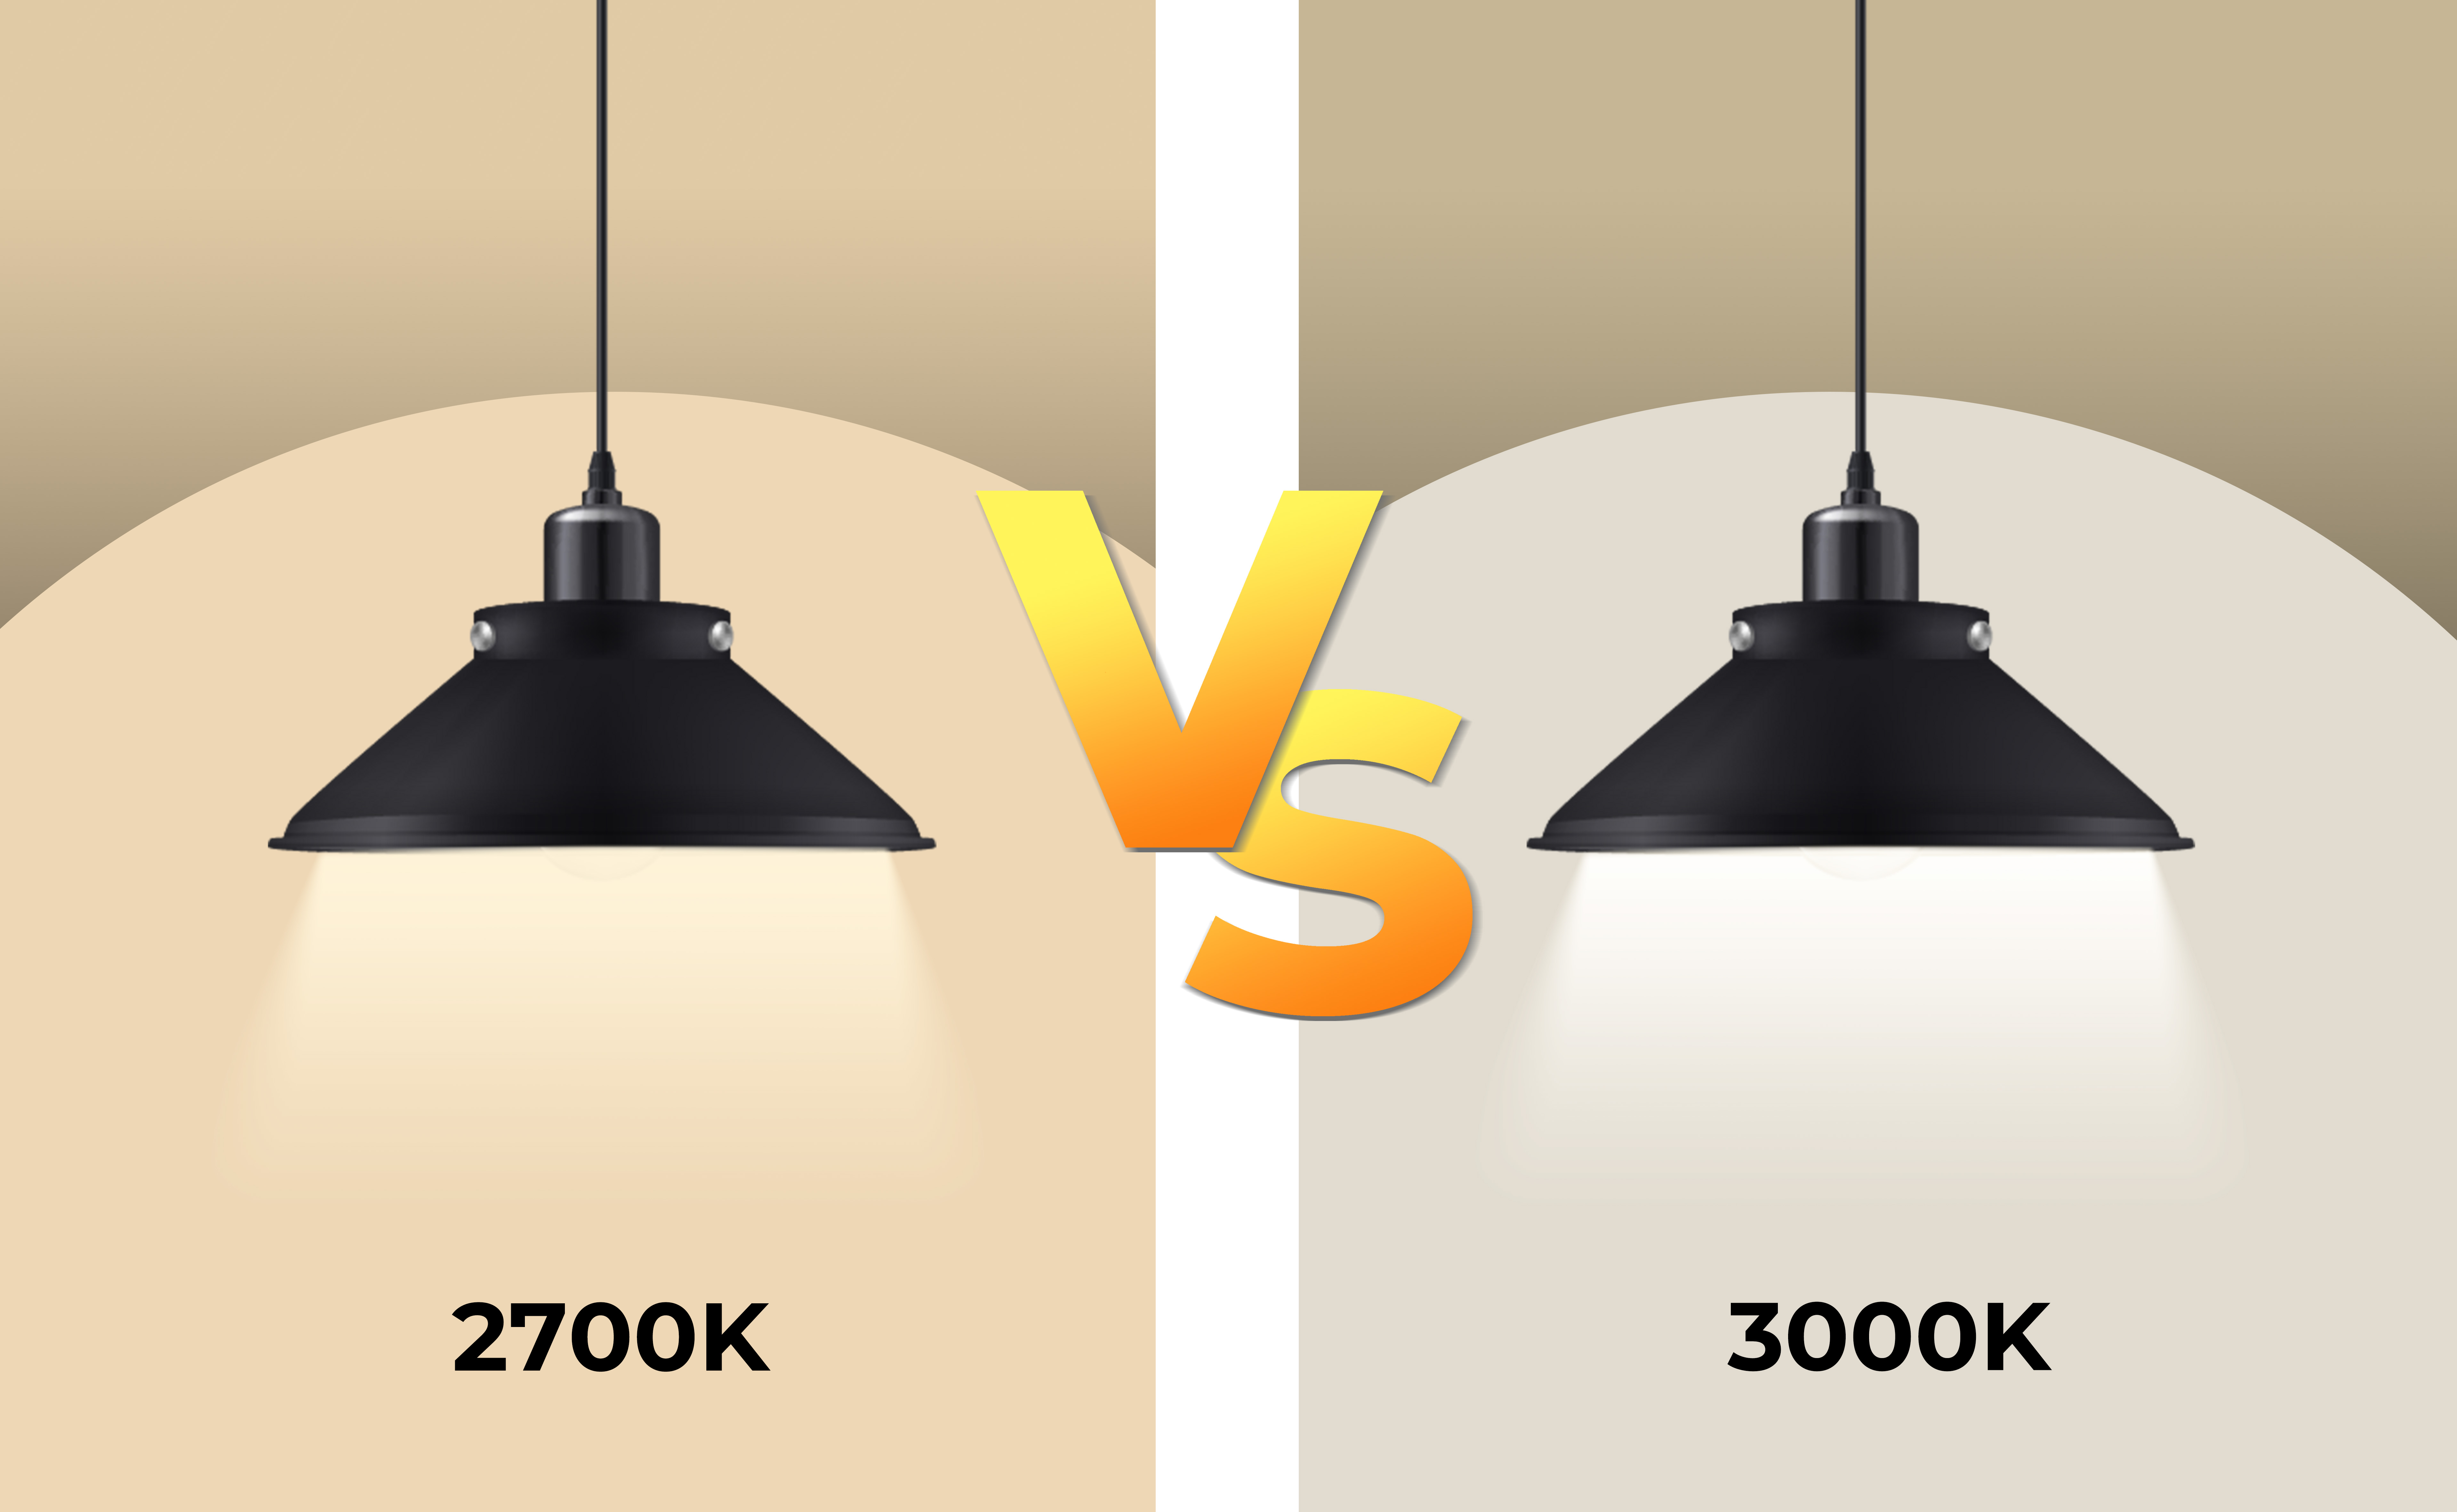 2700K vs Lighting: Discovering the difference